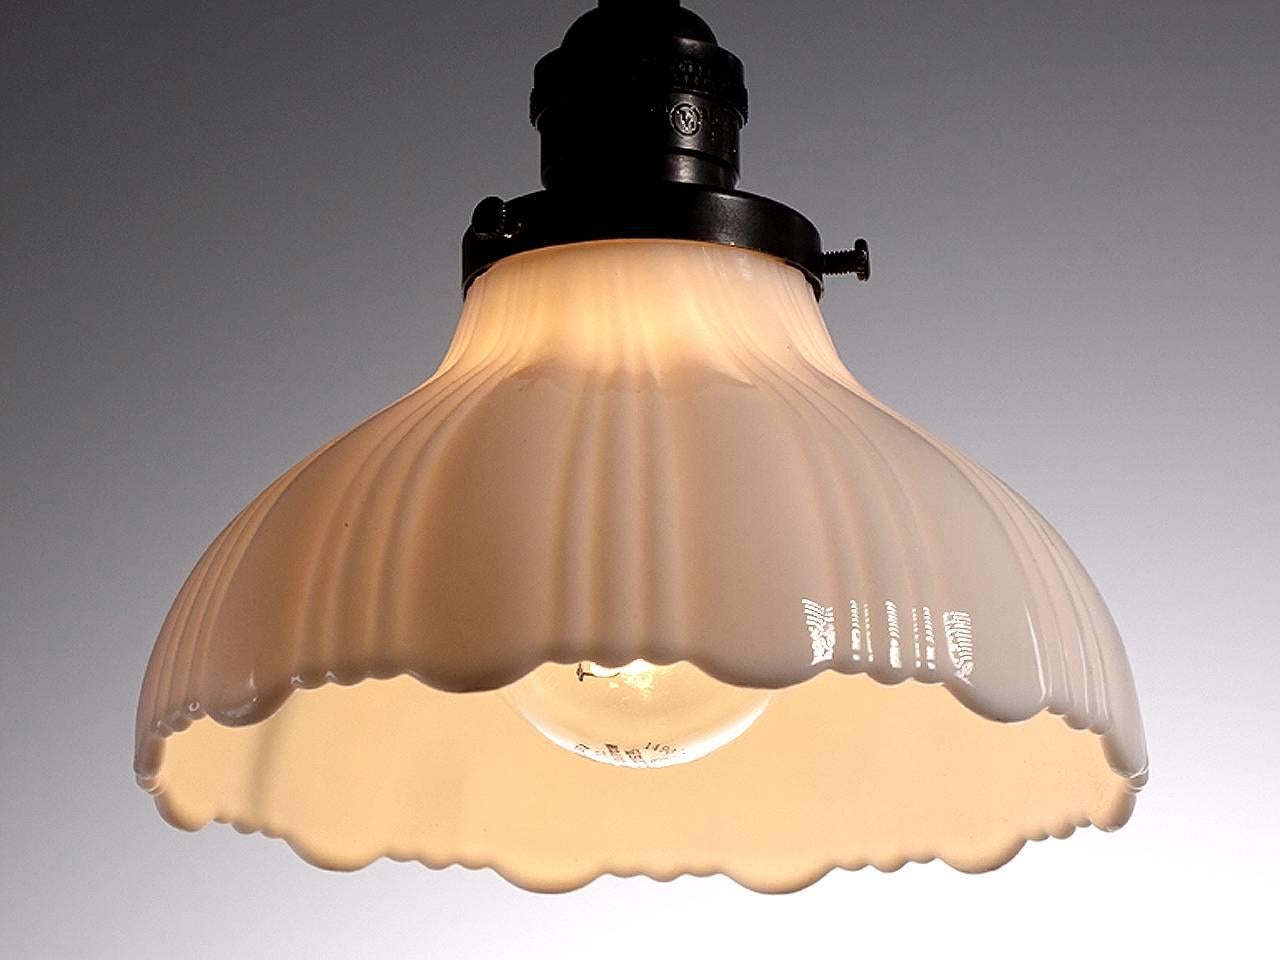 Softly curved bell shaped pendants are a Classic. They feel at home with any style decor. This example is an extra heavy thick-thin pattern in cast milk glass with a scalloped edge. The pattern has three thin ribs and one wide. 